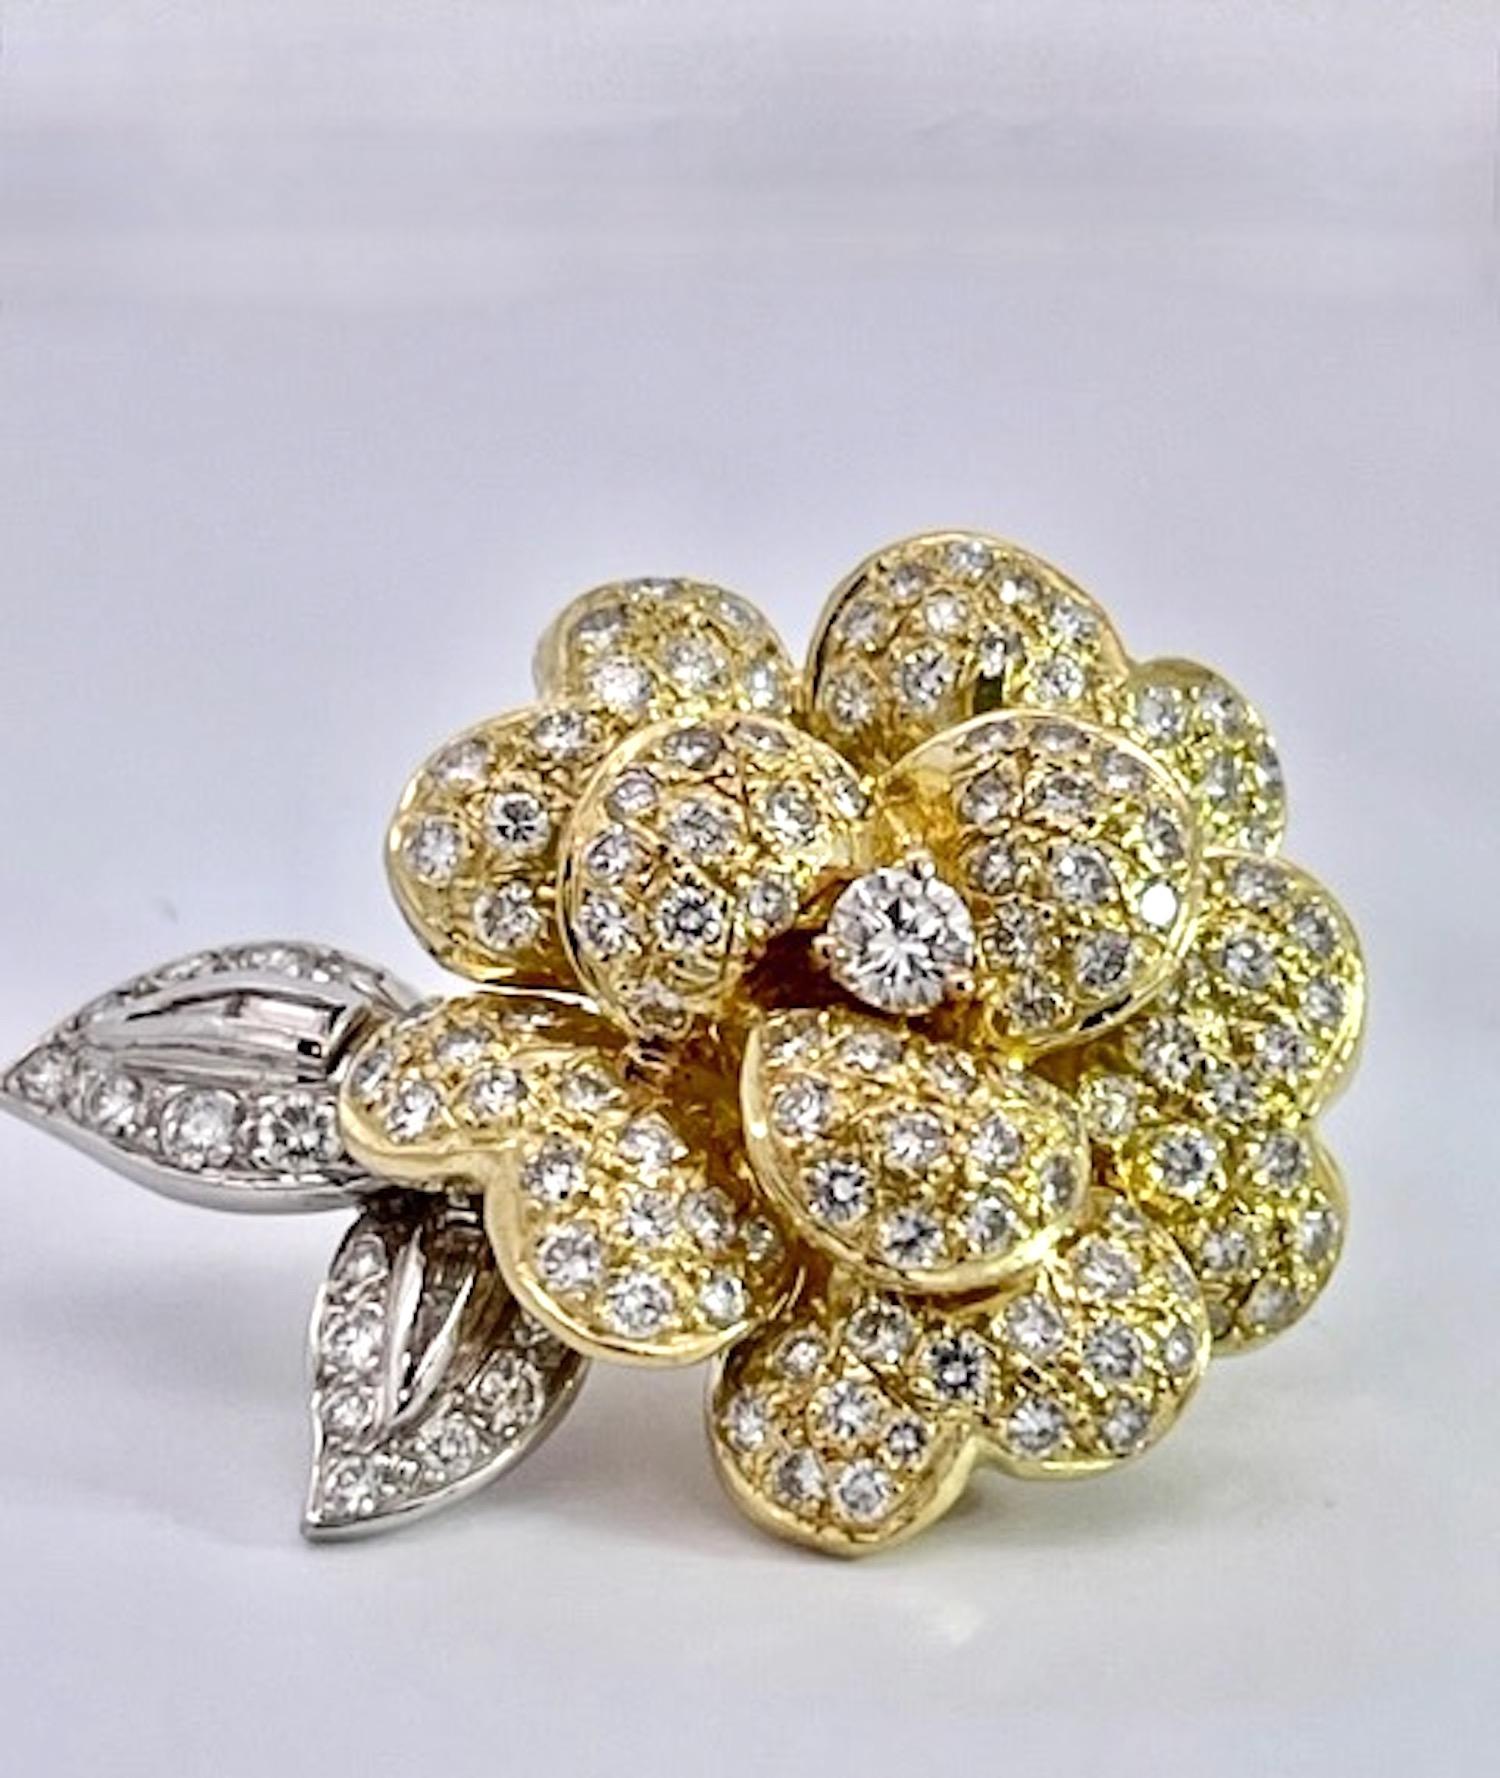 Diamond Rose Earrings Large Yellow Gold 14K For Sale 5